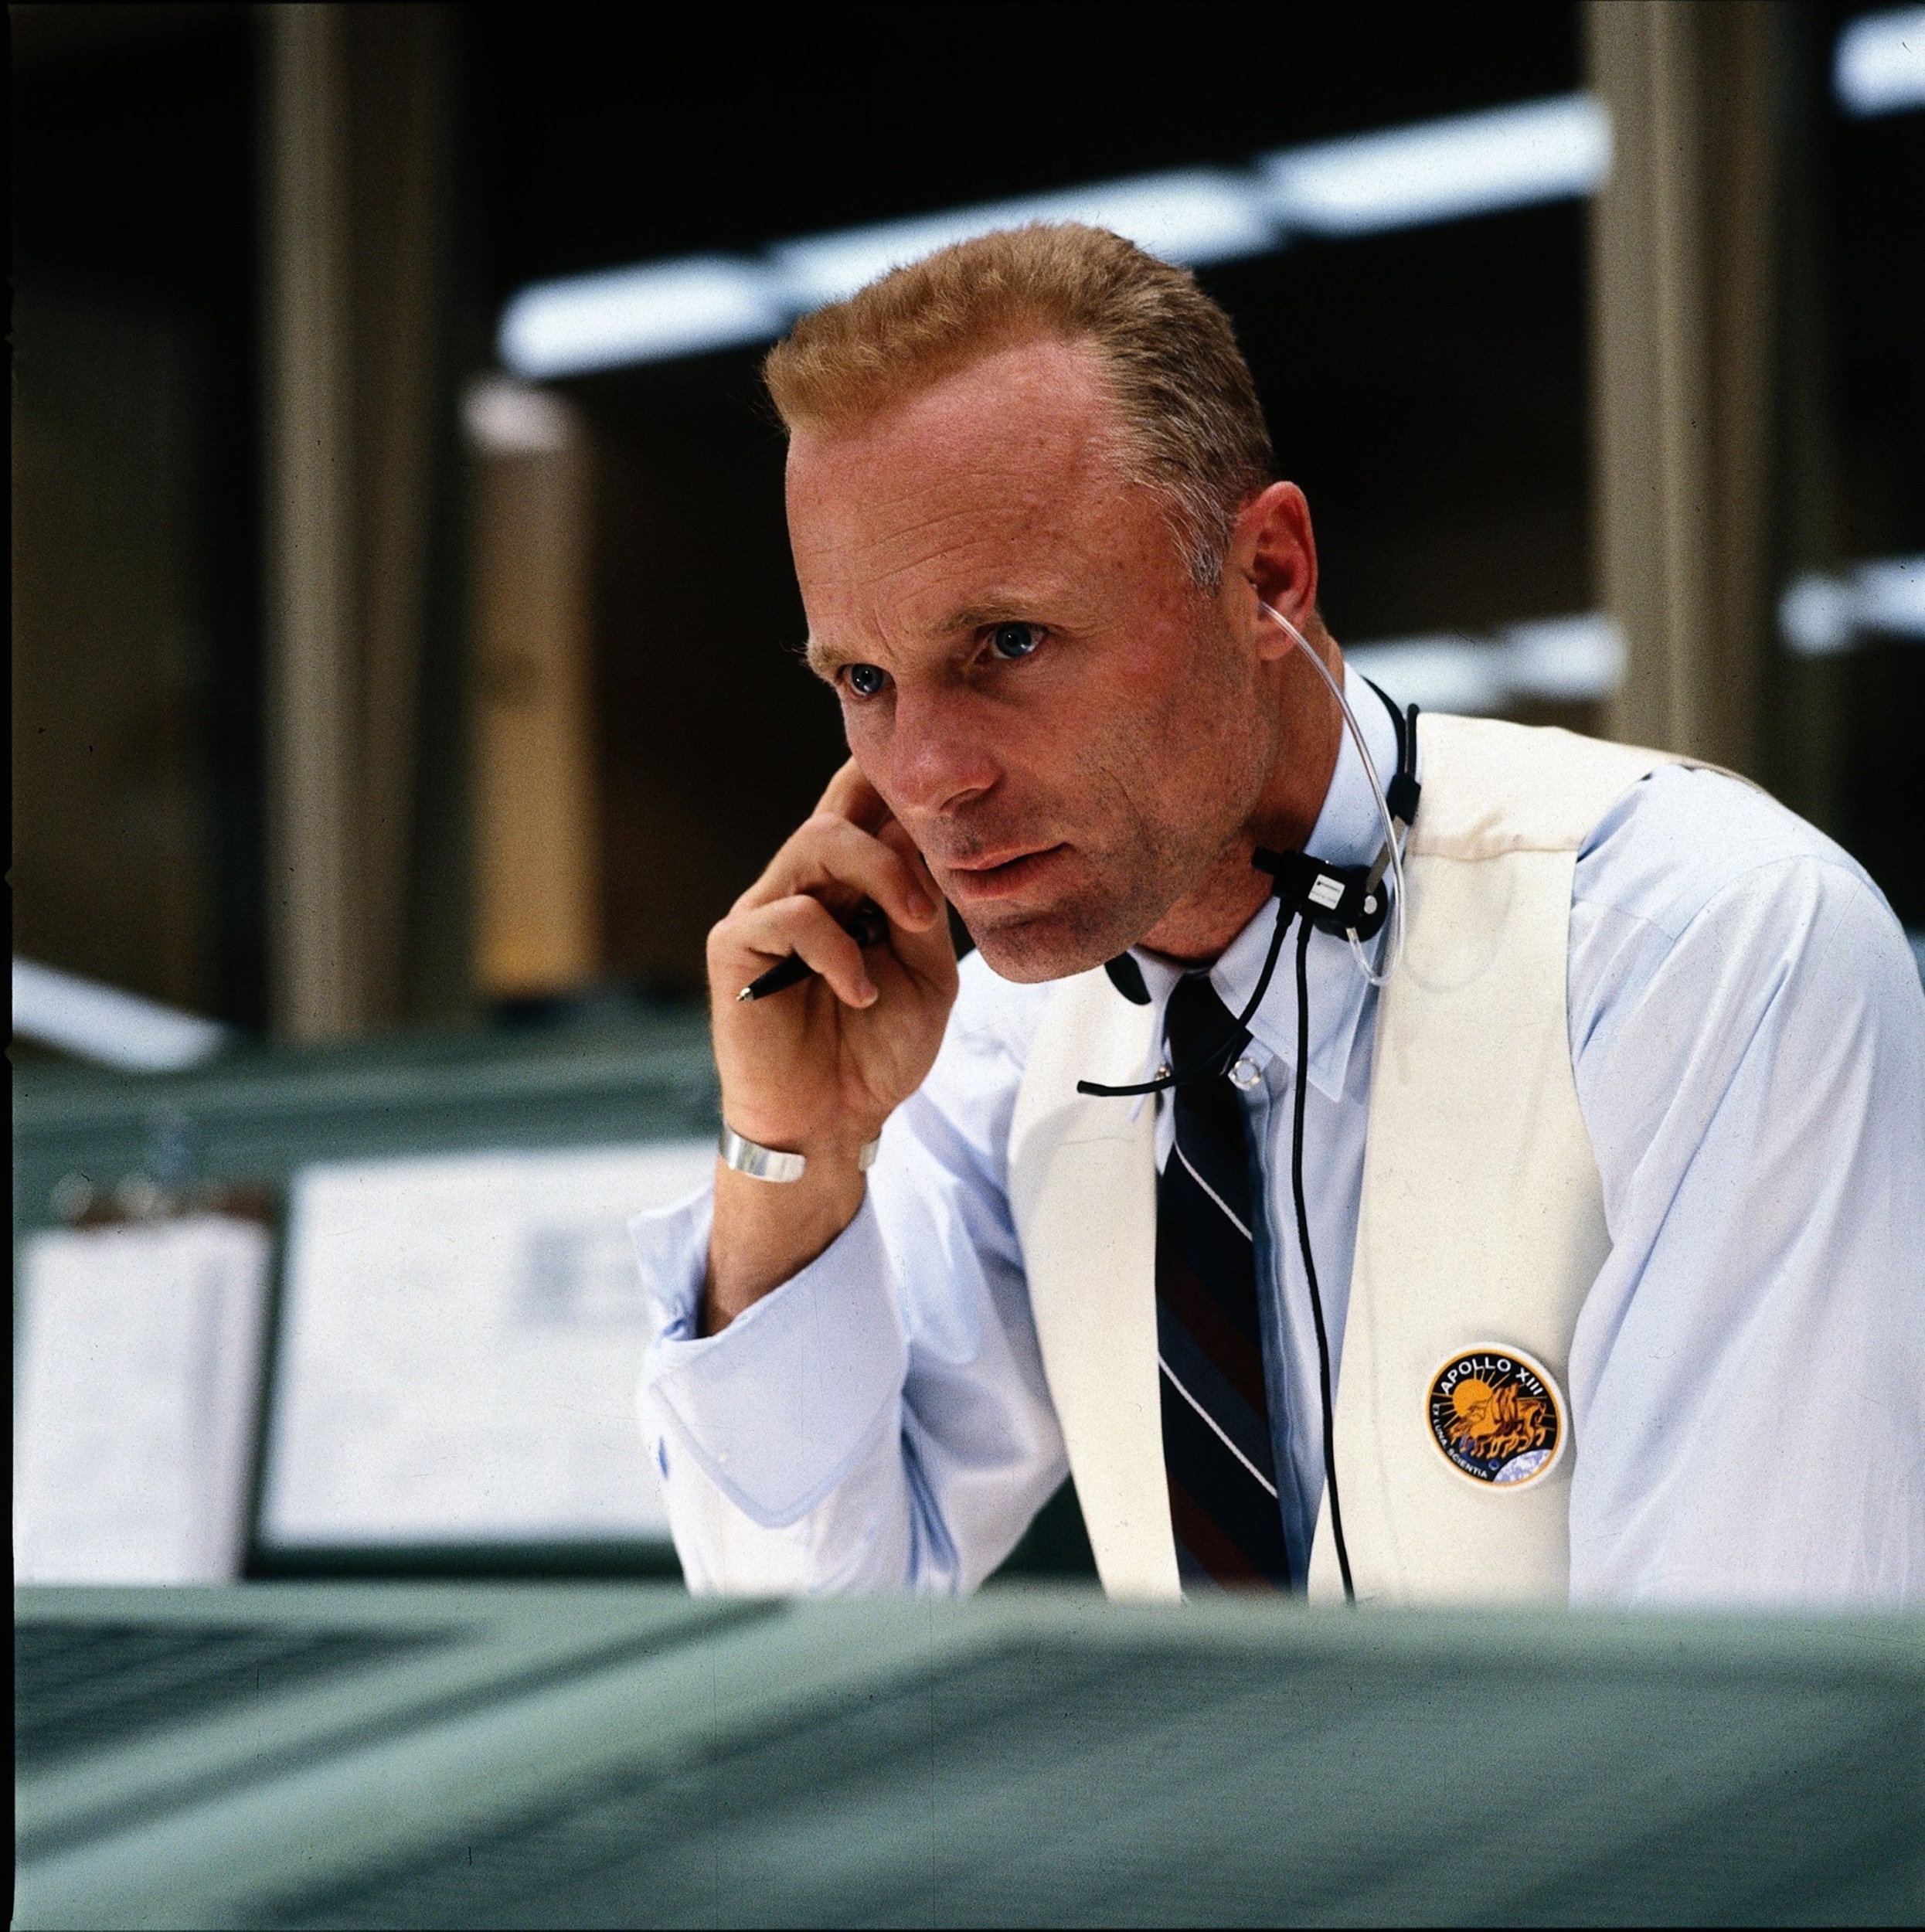 <p>One of the taglines for “Apollo 13” was “Failure is not an option.” Harris’ character of Gene Krantz also says it in the film. However, Krantz never said this in real life. It was a creation of the screenwriters.</p><p><a href='https://www.msn.com/en-us/community/channel/vid-cj9pqbr0vn9in2b6ddcd8sfgpfq6x6utp44fssrv6mc2gtybw0us'>Follow us on MSN to see more of our exclusive entertainment content.</a></p>